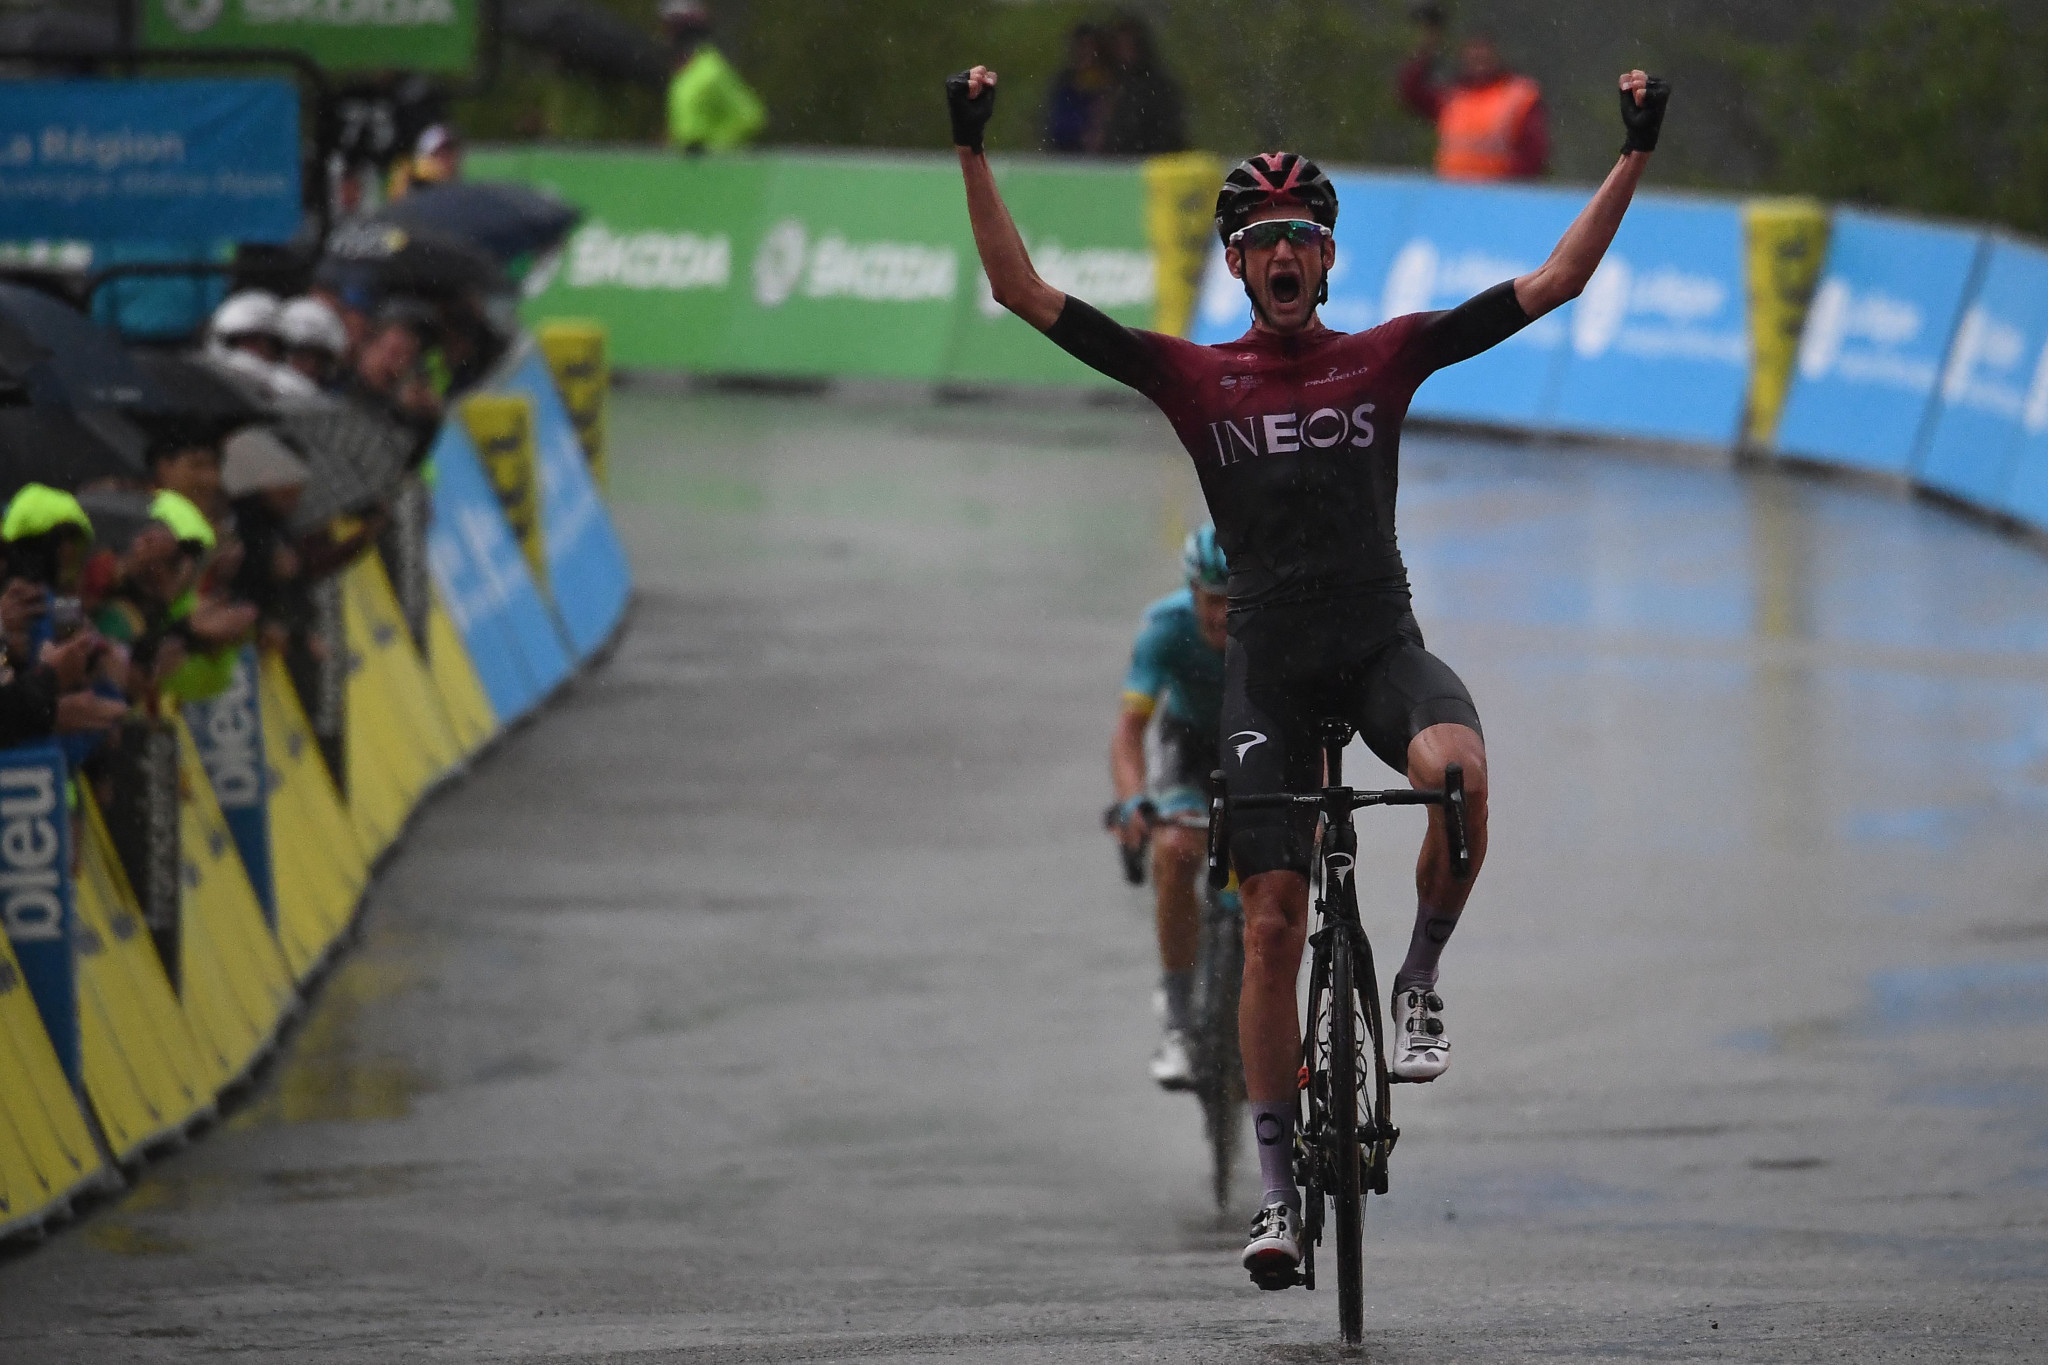 Poels dedicates stage win to injured Froome as Fuglsang takes Critérium du Dauphiné race lead